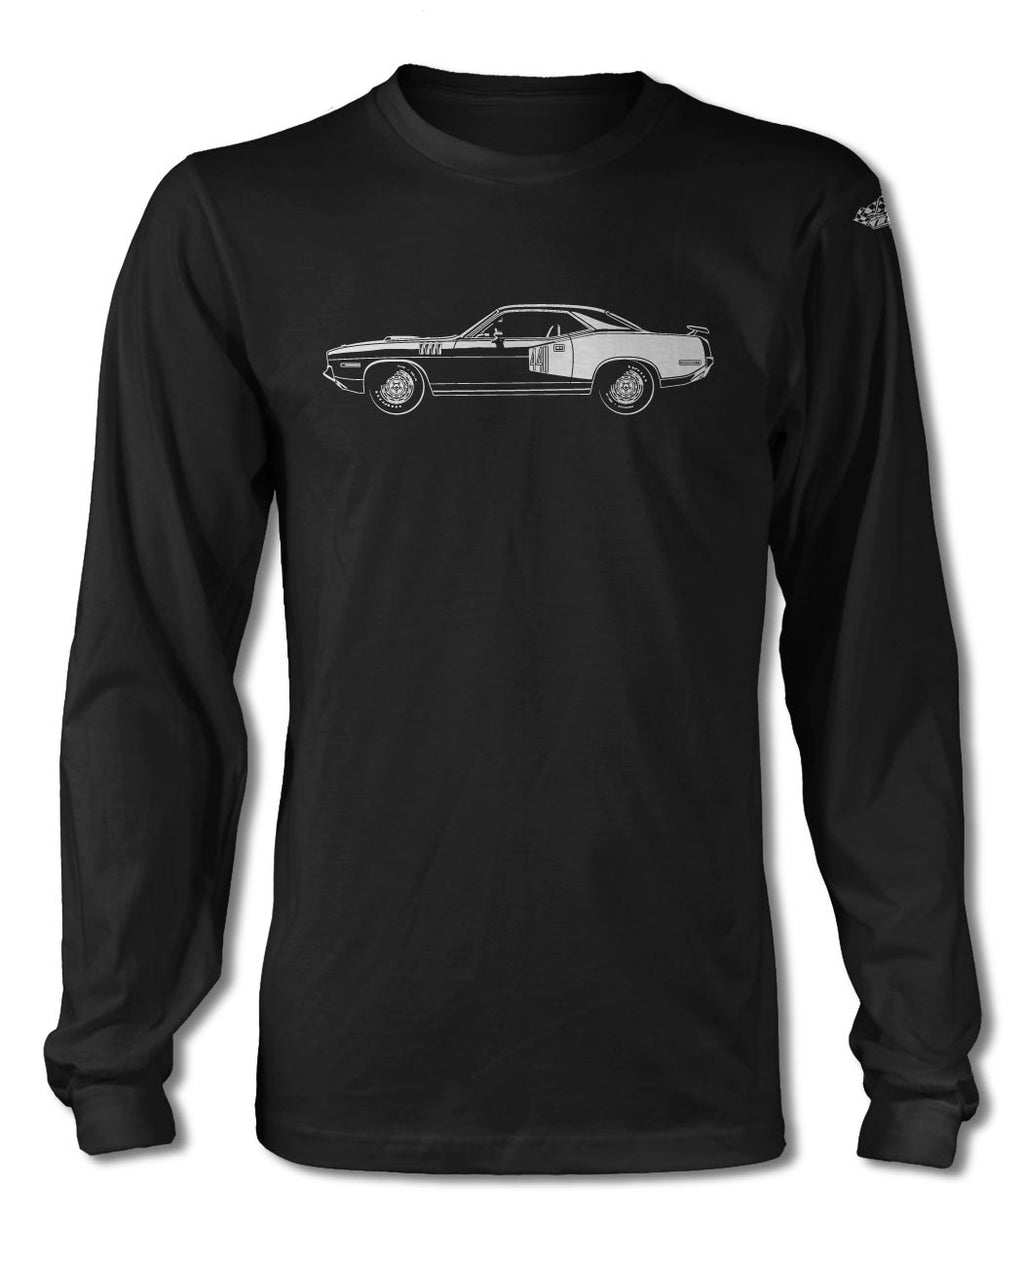 1971 Plymouth Barracuda 'Cuda 440 Coupe T-Shirt - Long Sleeve - Side View